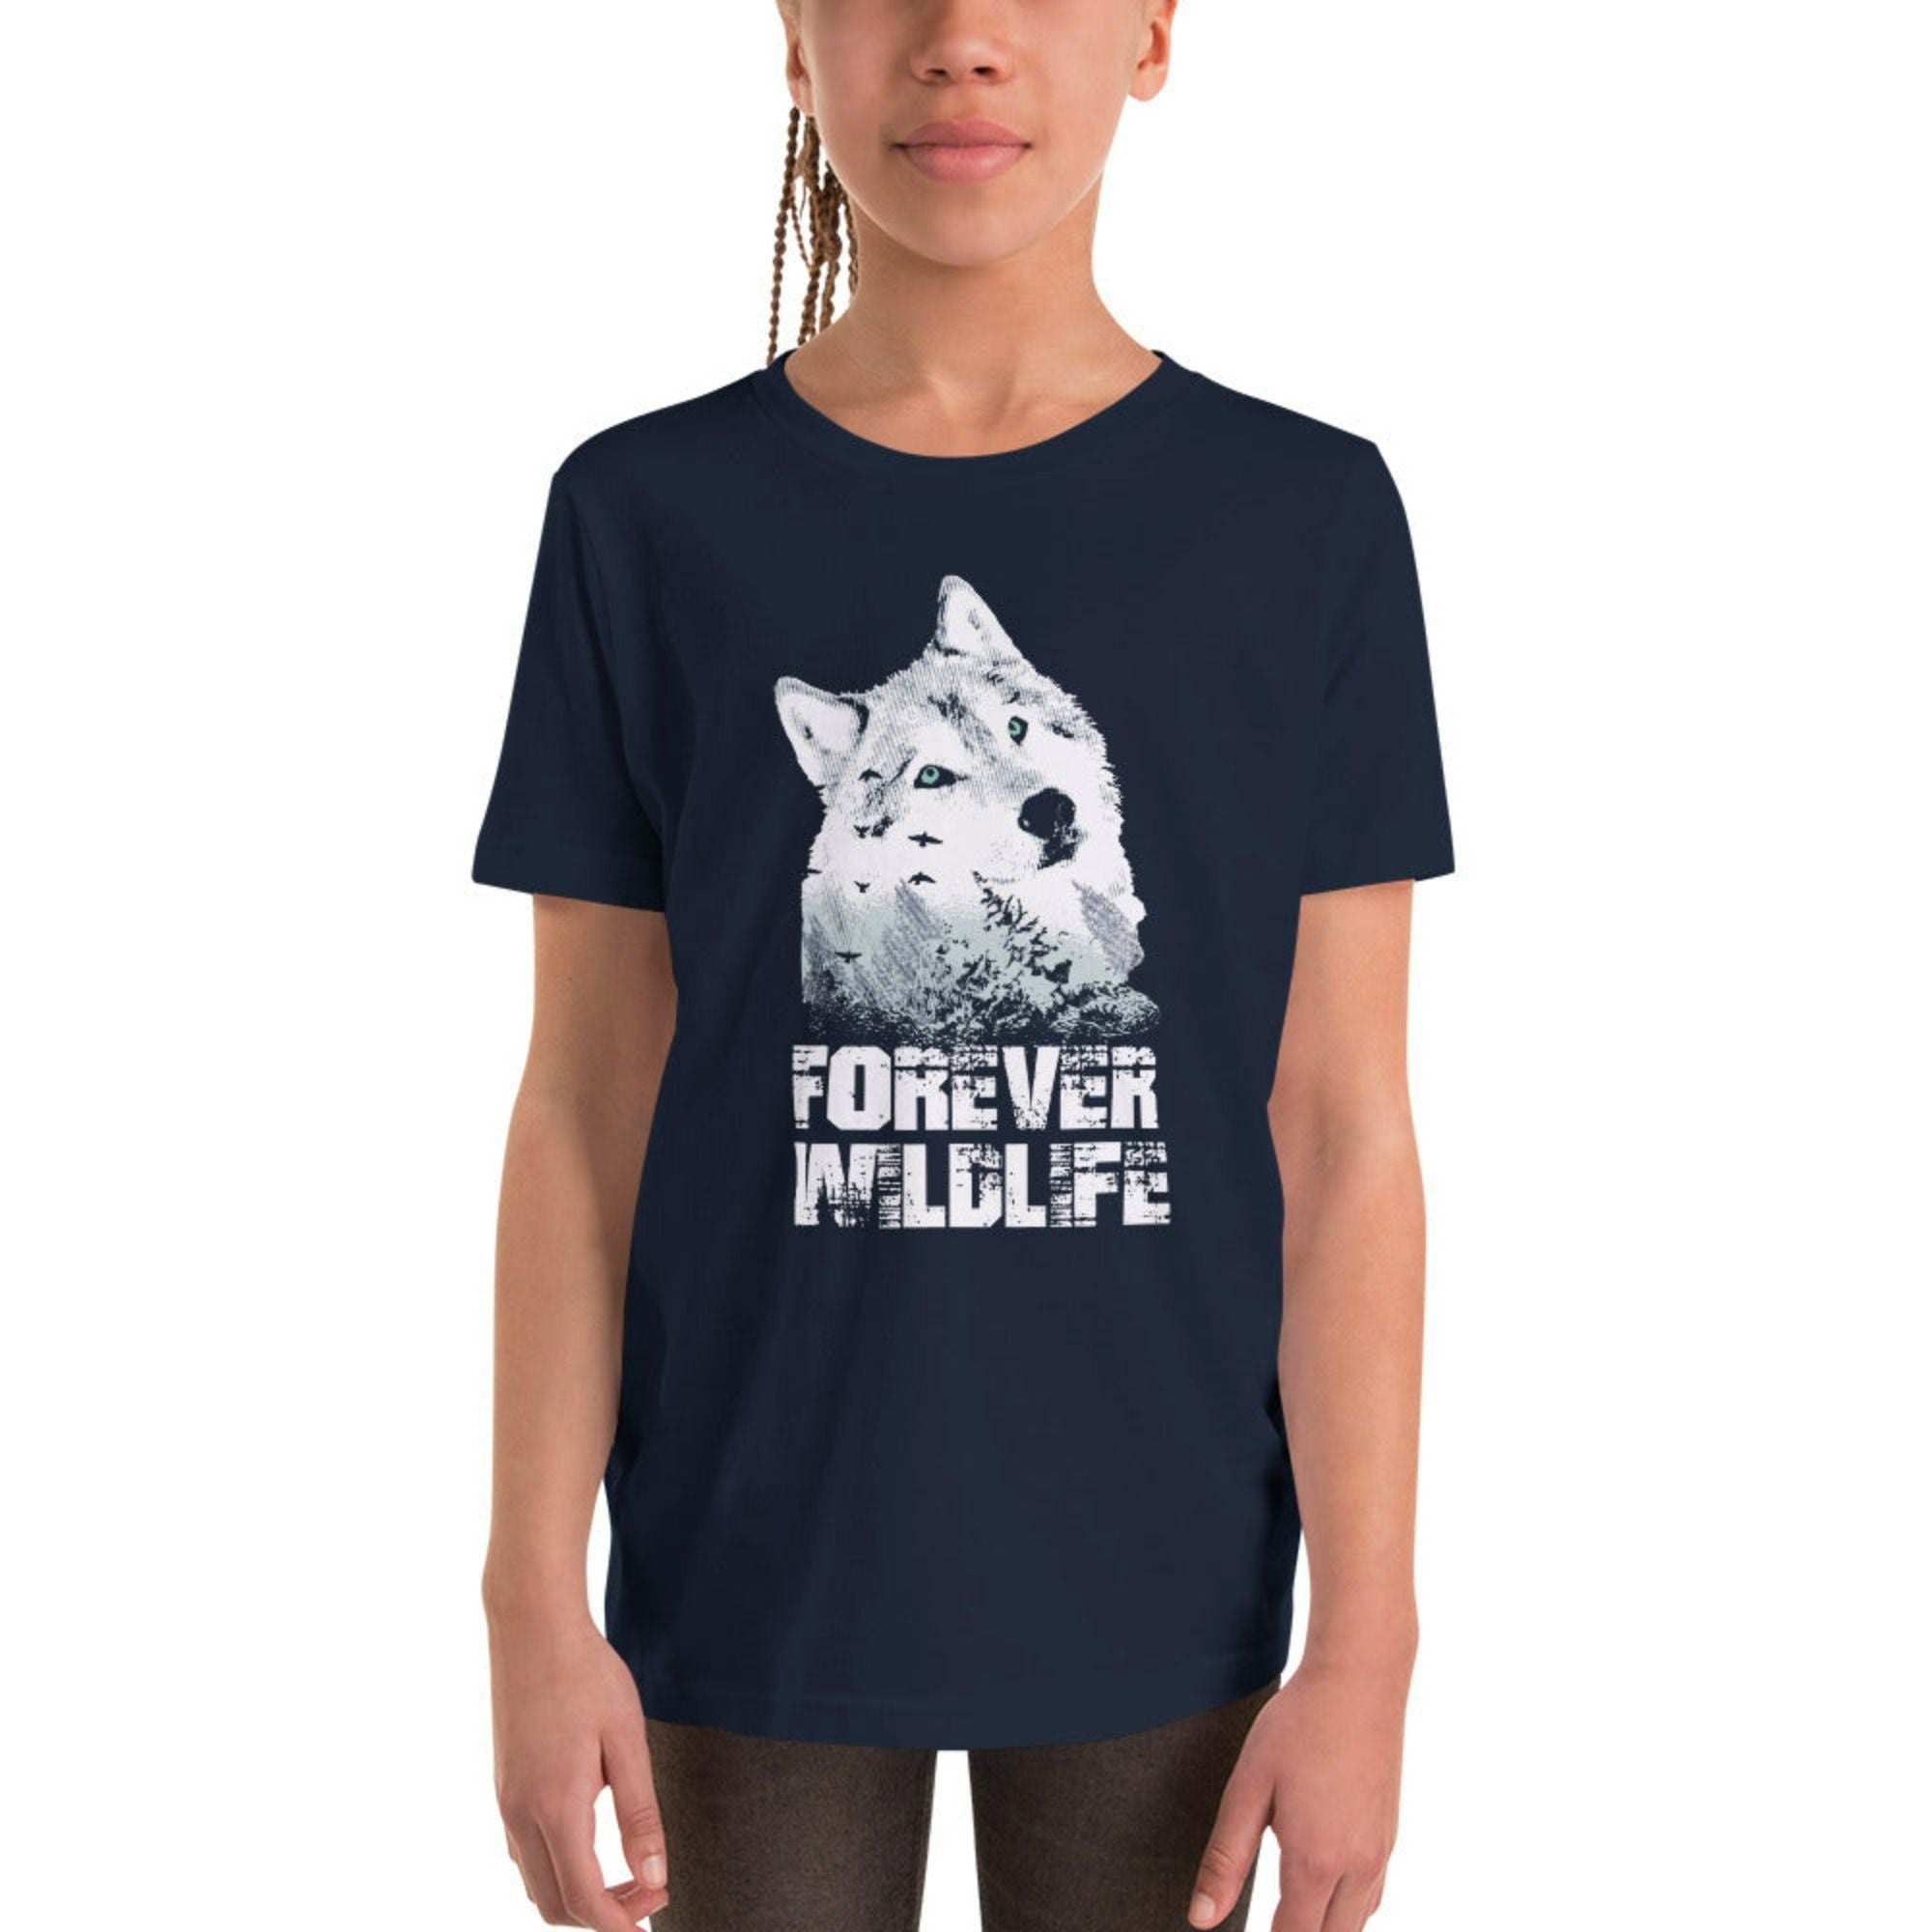 Teen wearing Youth T-Shirt with Wolf graphic as part of Wildlife T Shirts, Wildlife Clothing & Apparel by Forever Wildlife